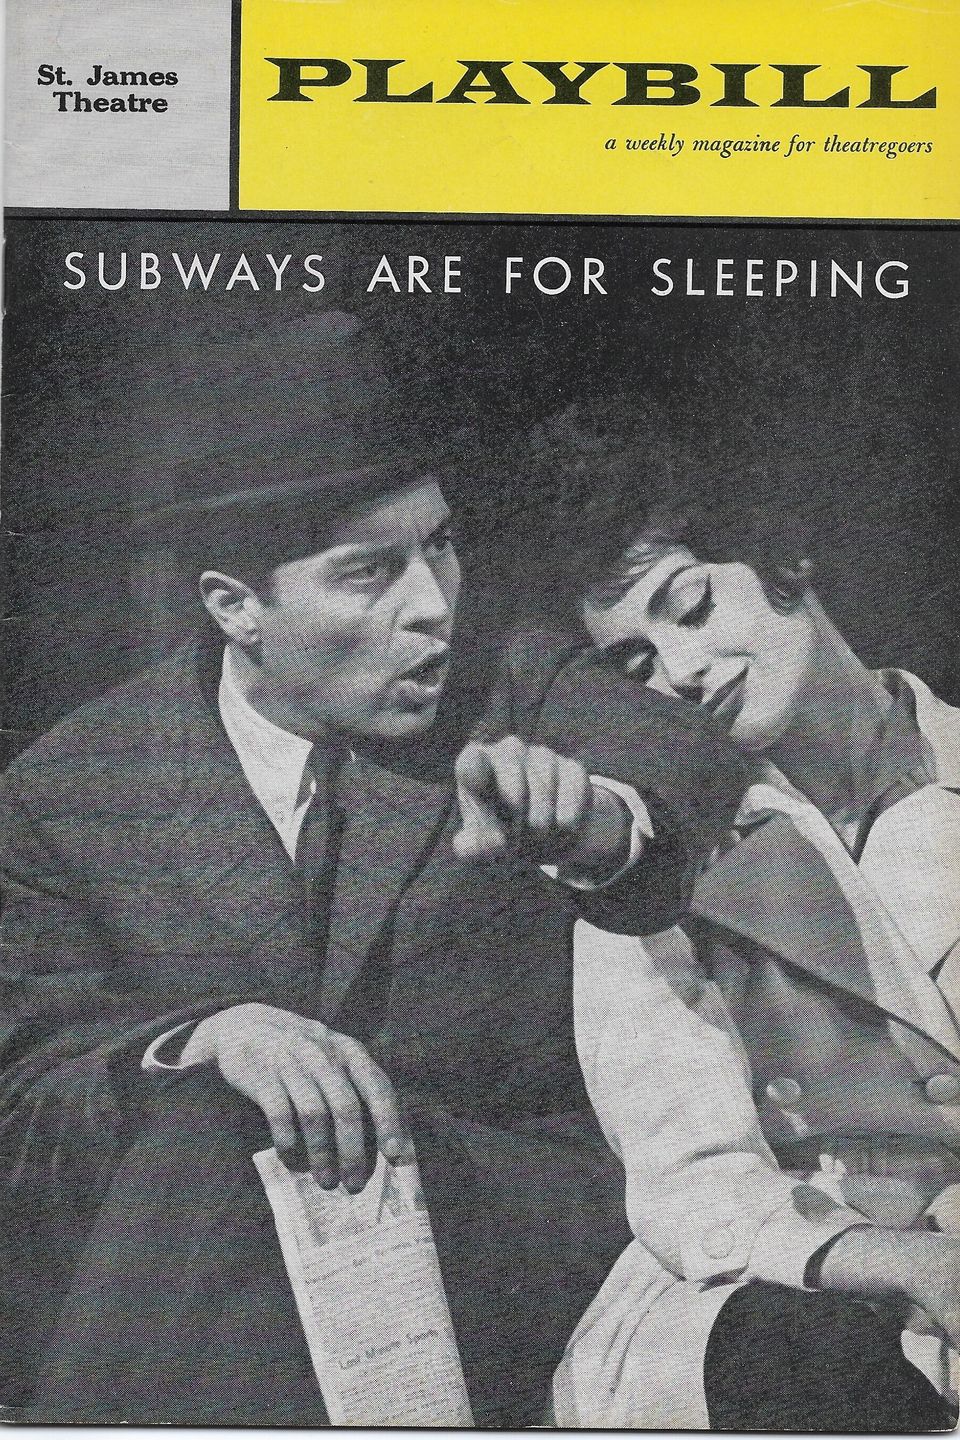 Subways are for sleeping